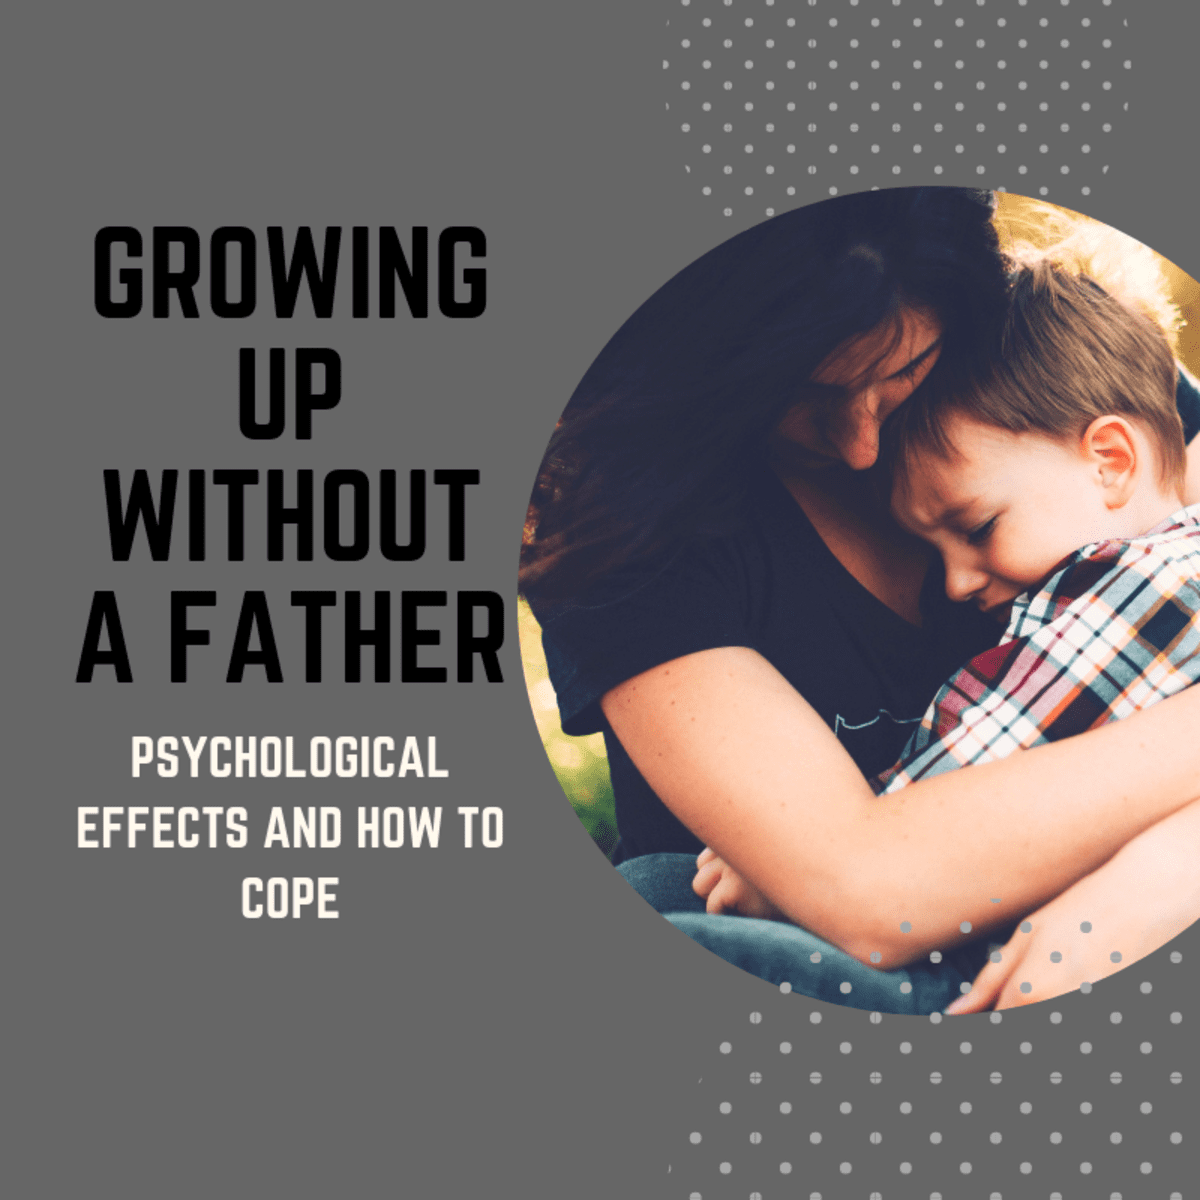 Psychological Effects of Growing Up Without a Father photo